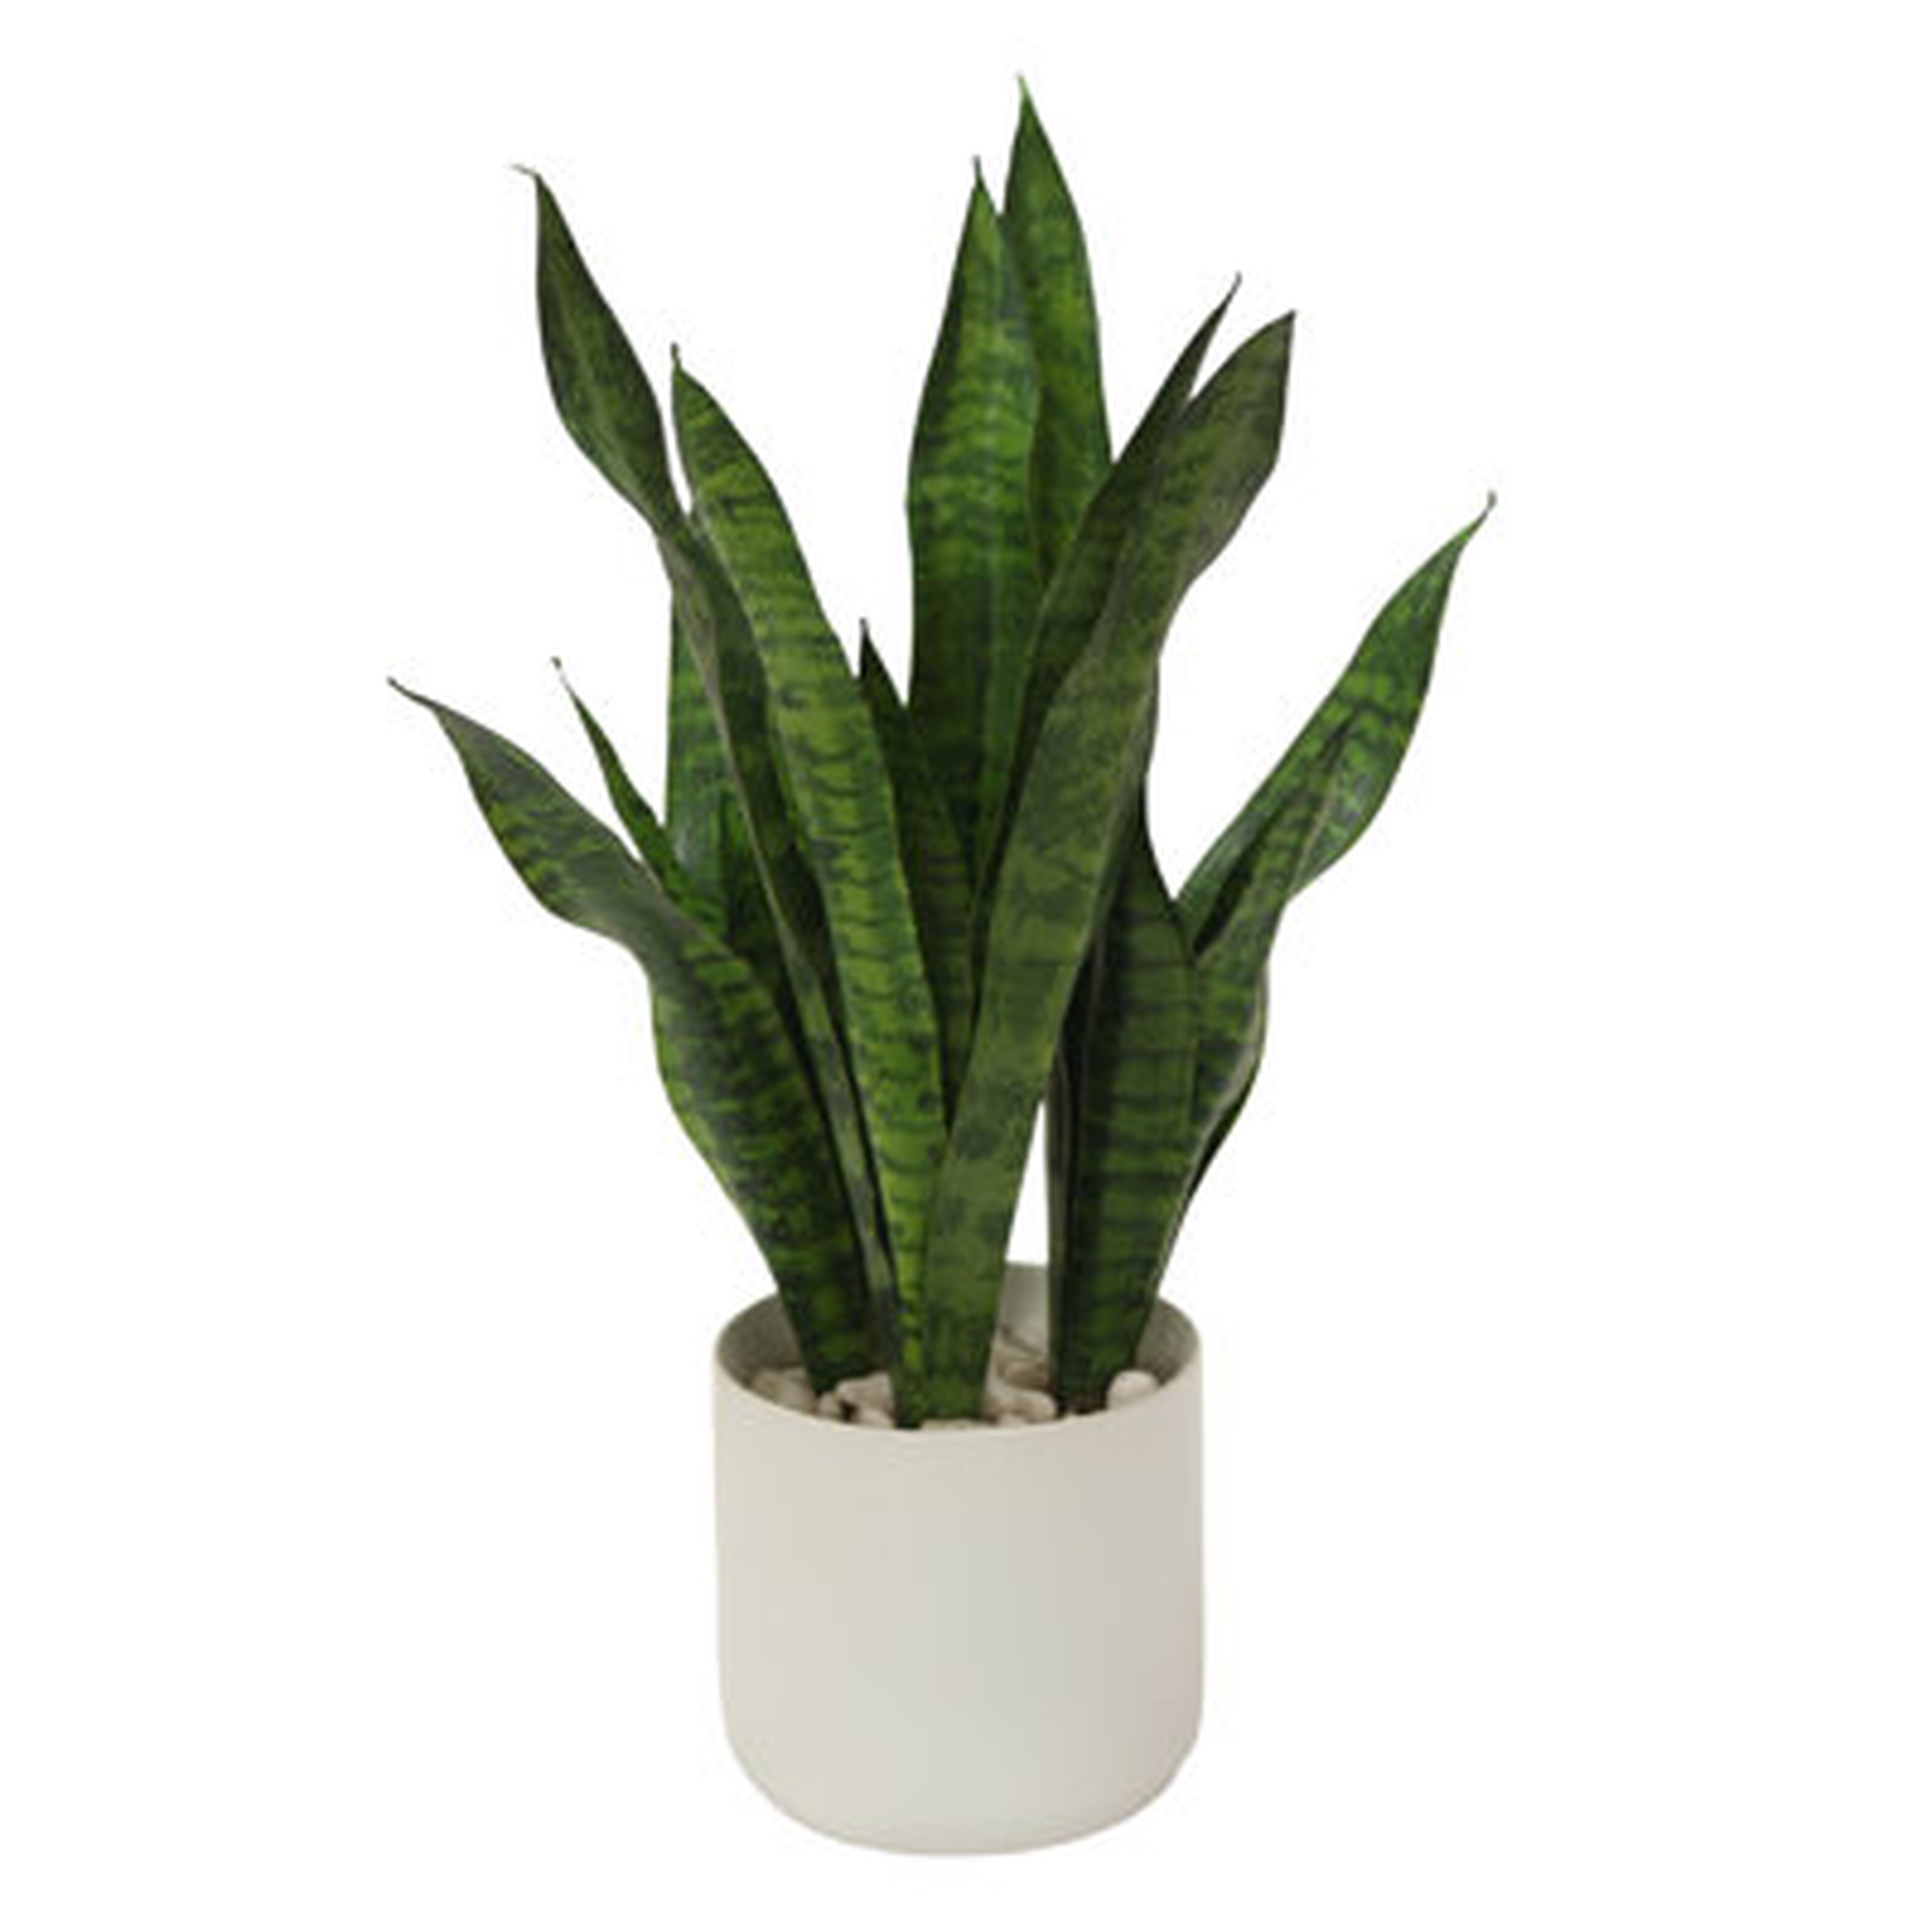 24" Artificial Snake Plant Plant in Planter - Wayfair